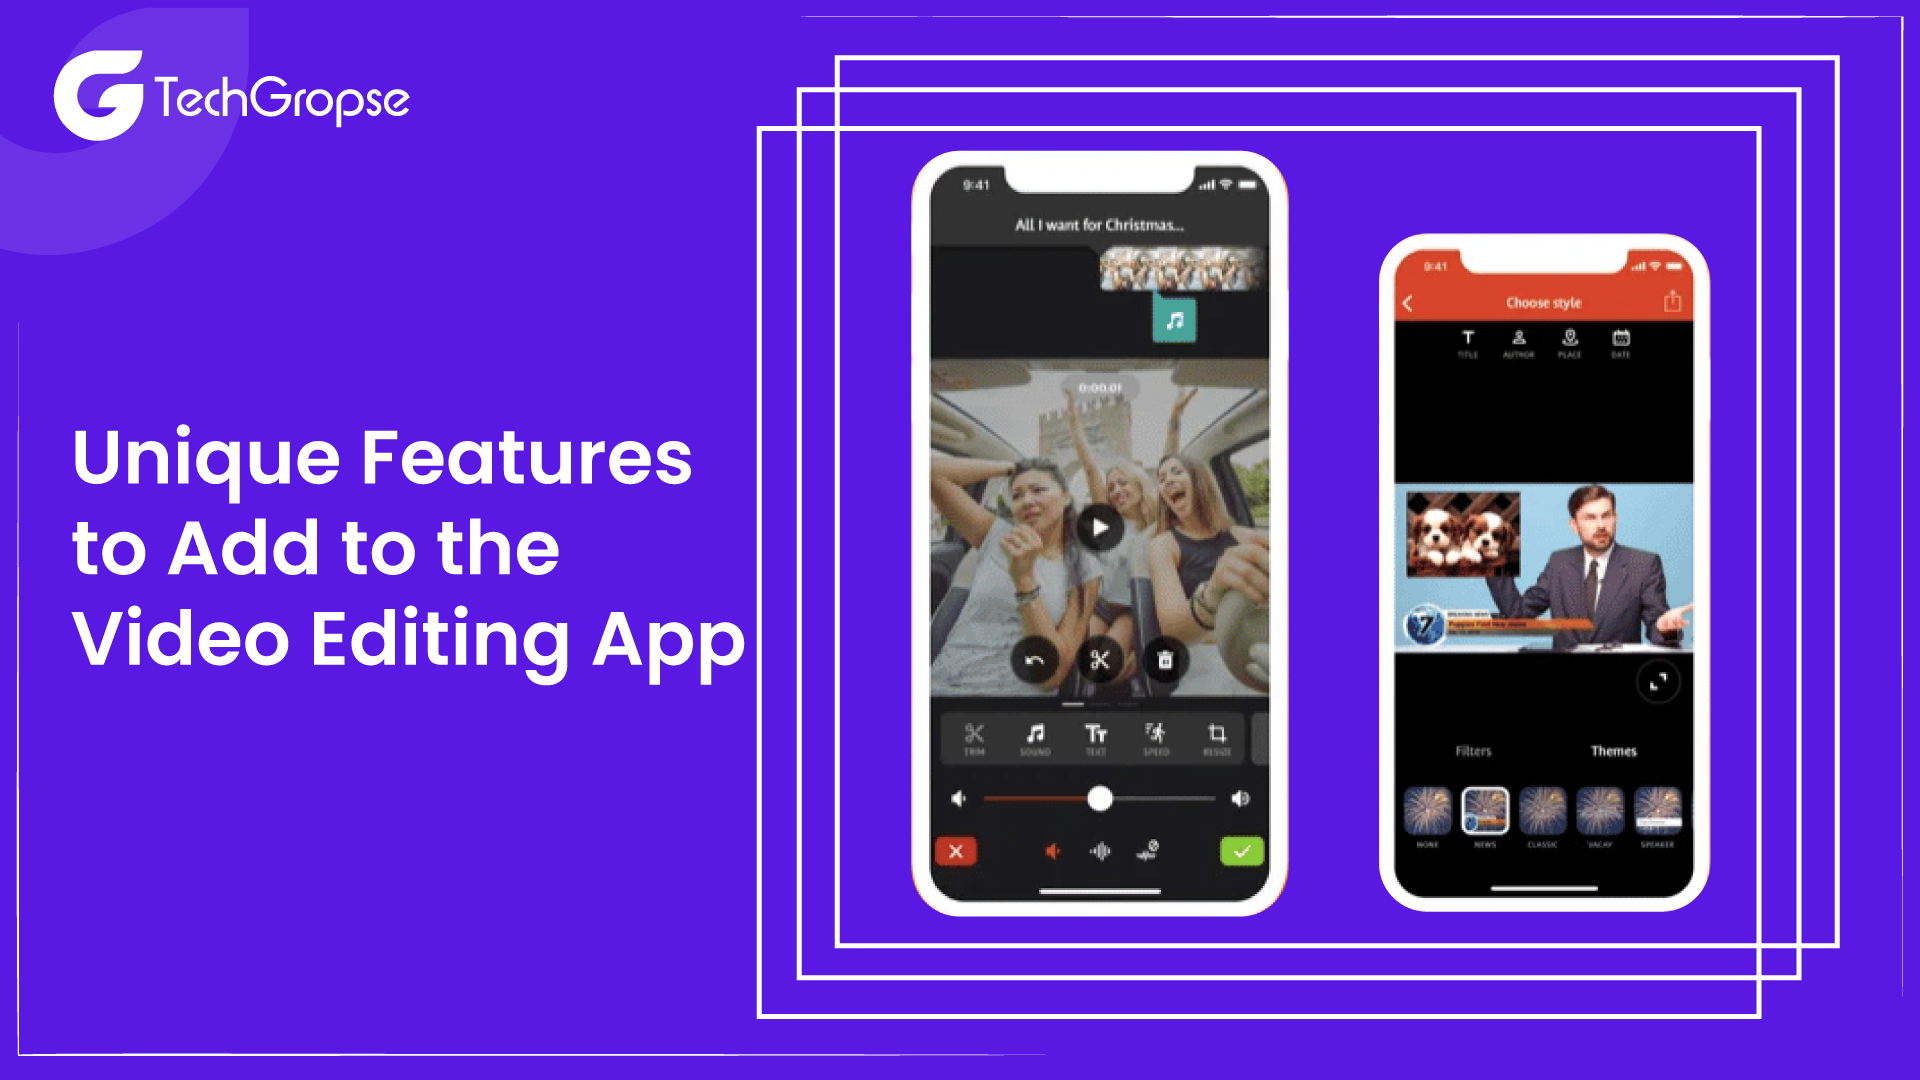 Unique Features to Add to the Video Editing App